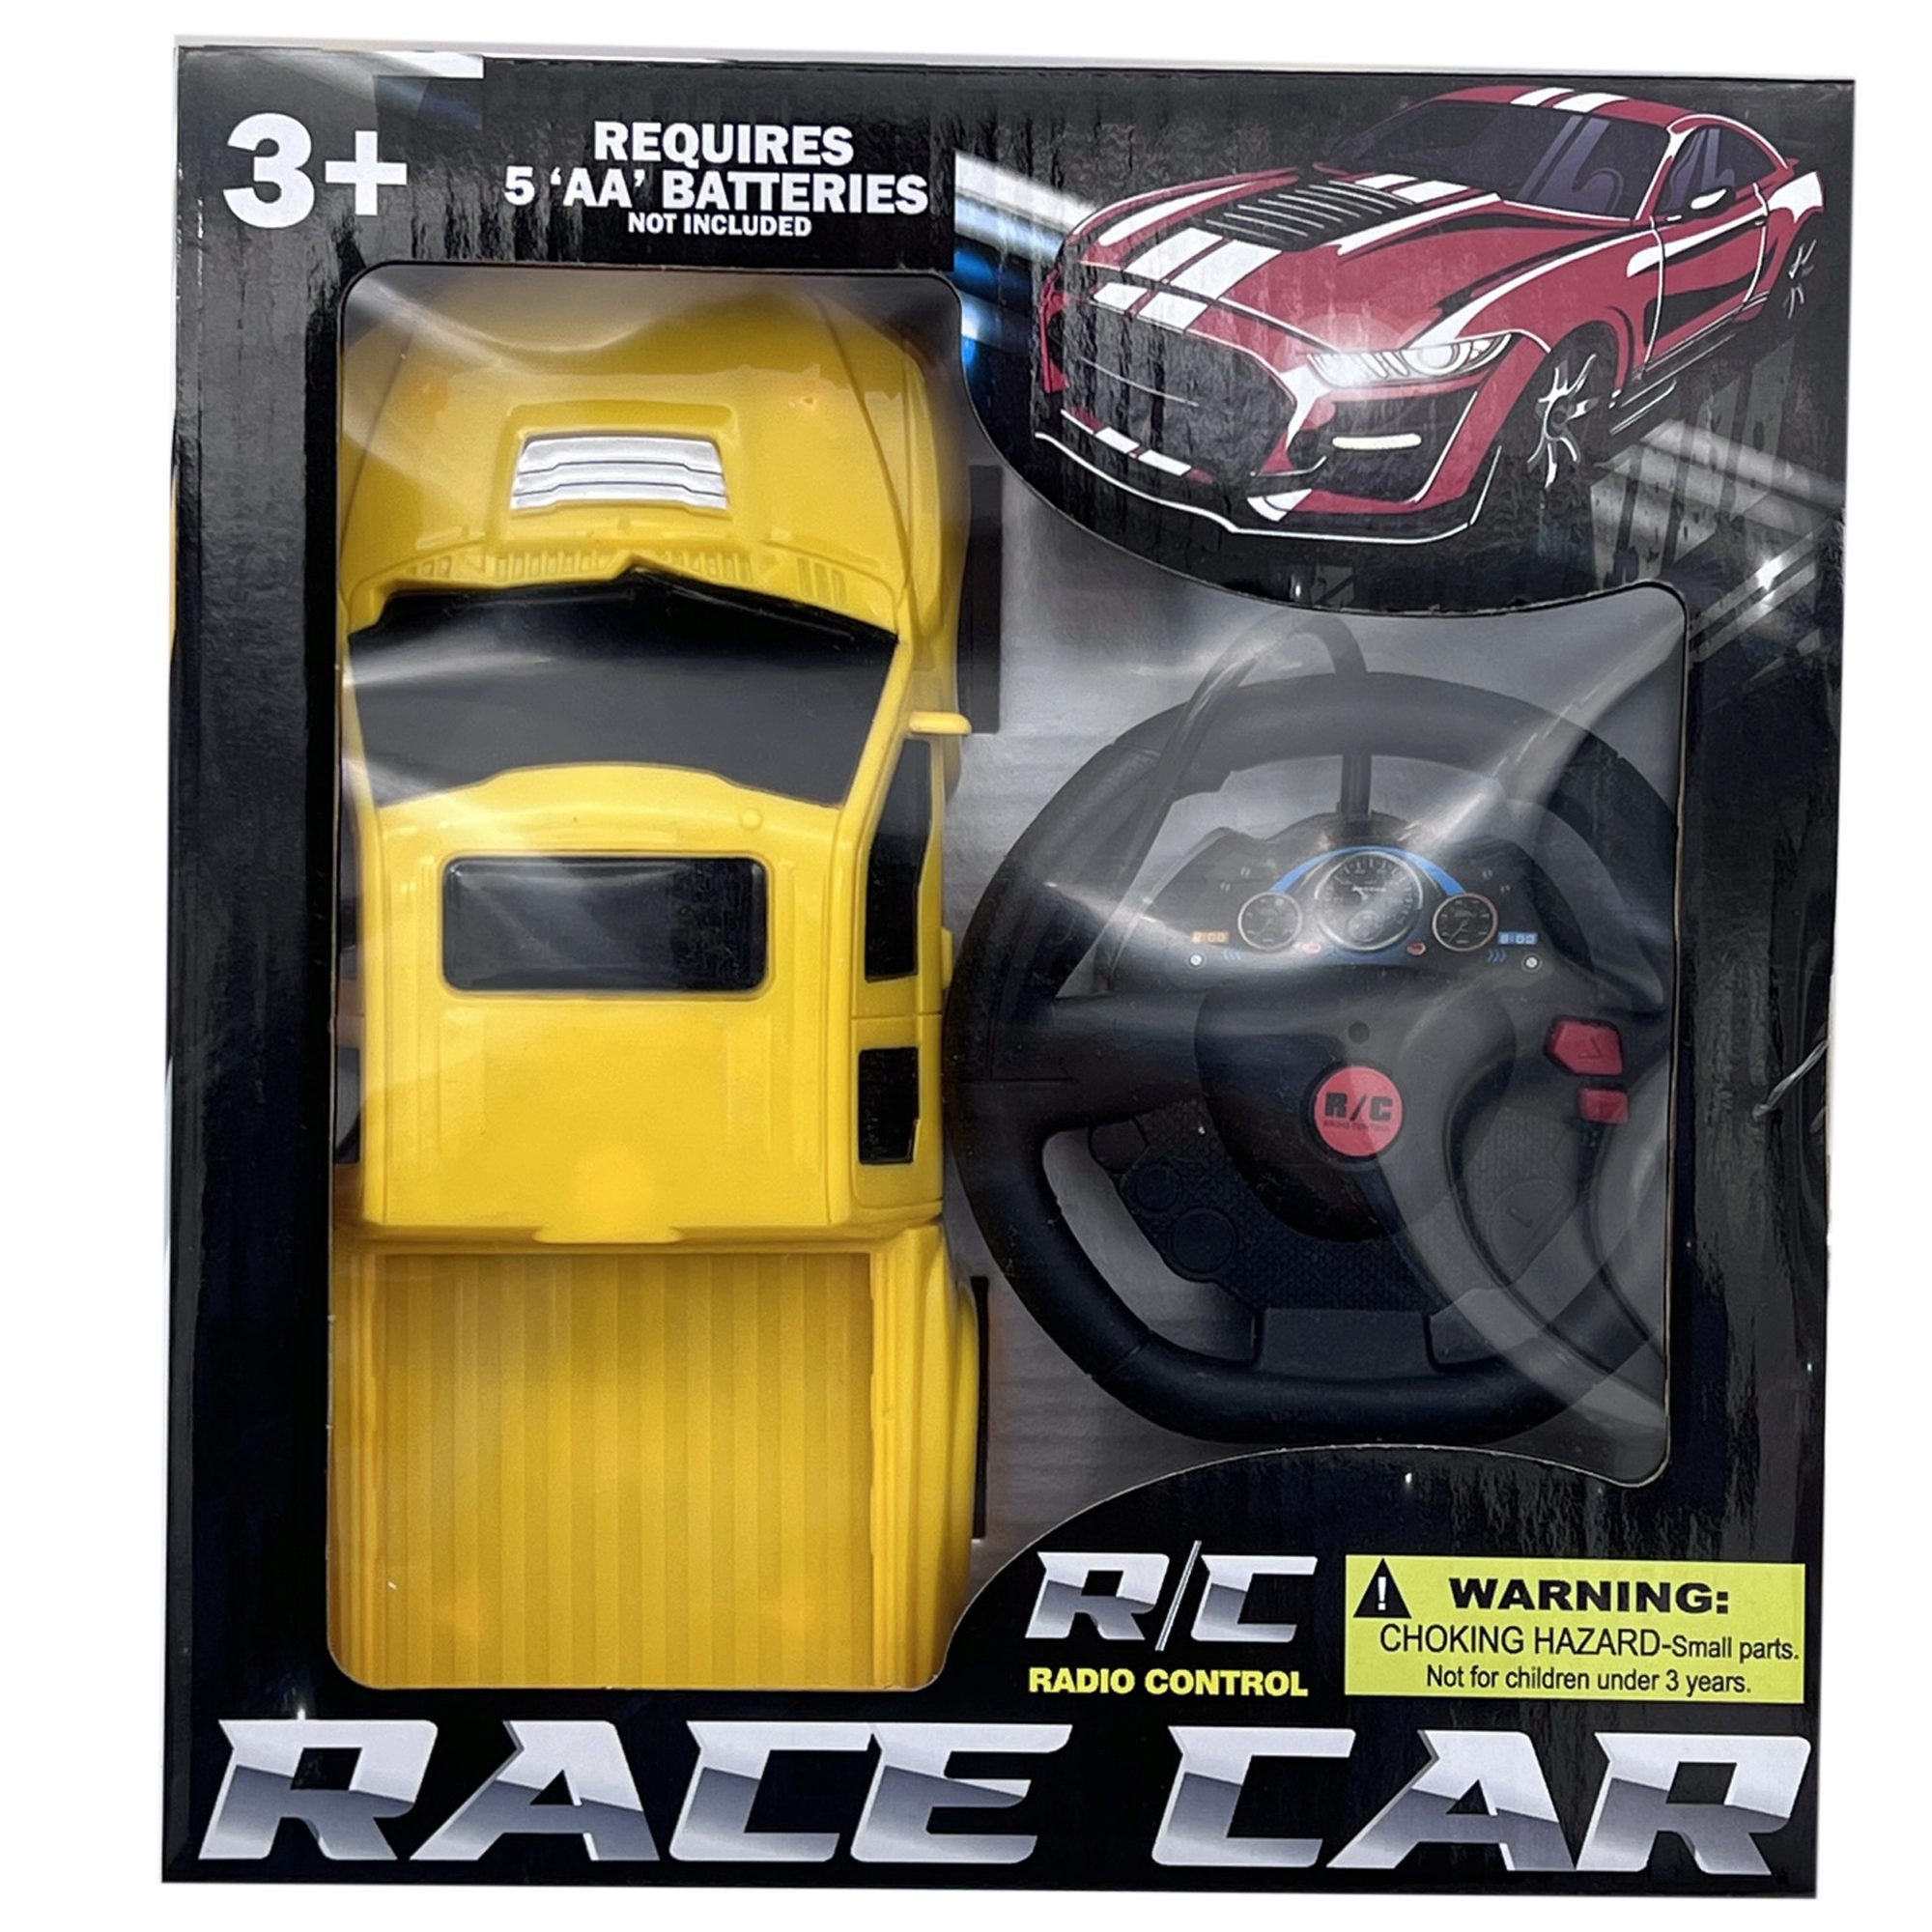 Battery Operated Super Race CAR with Steering Wheel REMOTE CONTROL - Qty 6